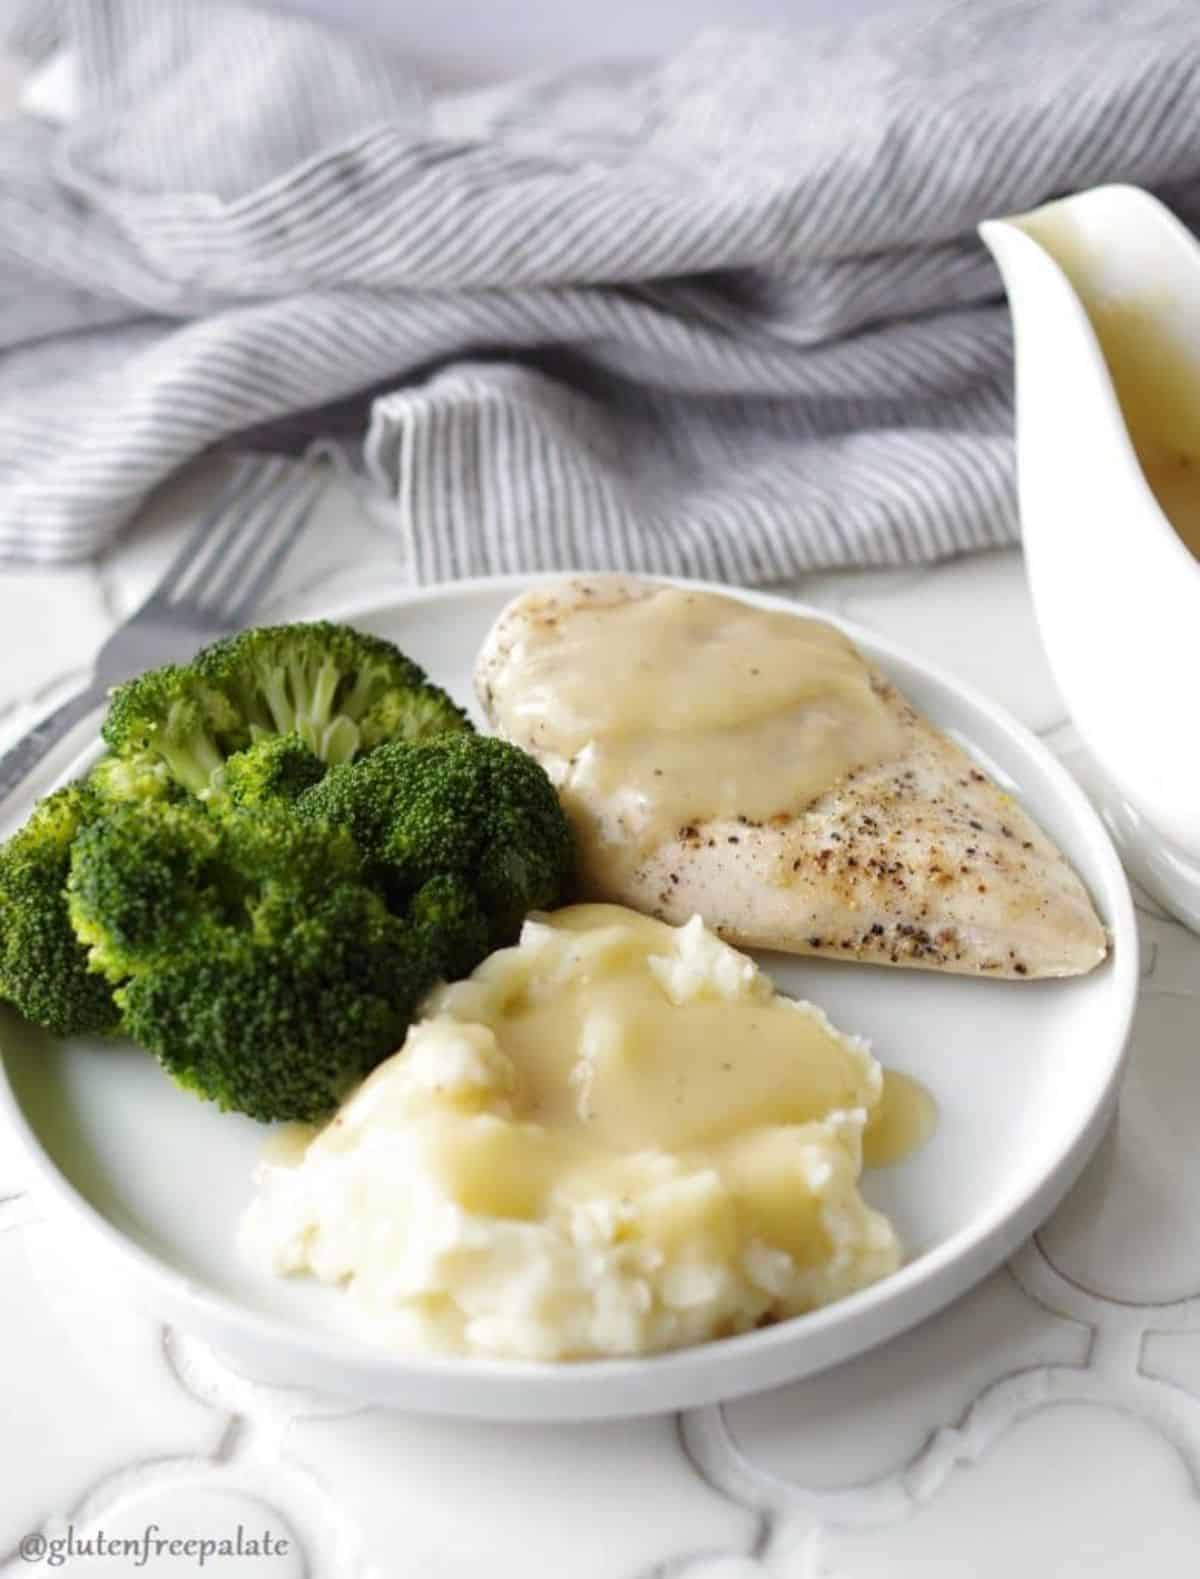 Five-Minute Gluten-Free Gravy on a piece of chicken, mashed potatoes and broccoli on a white plate.